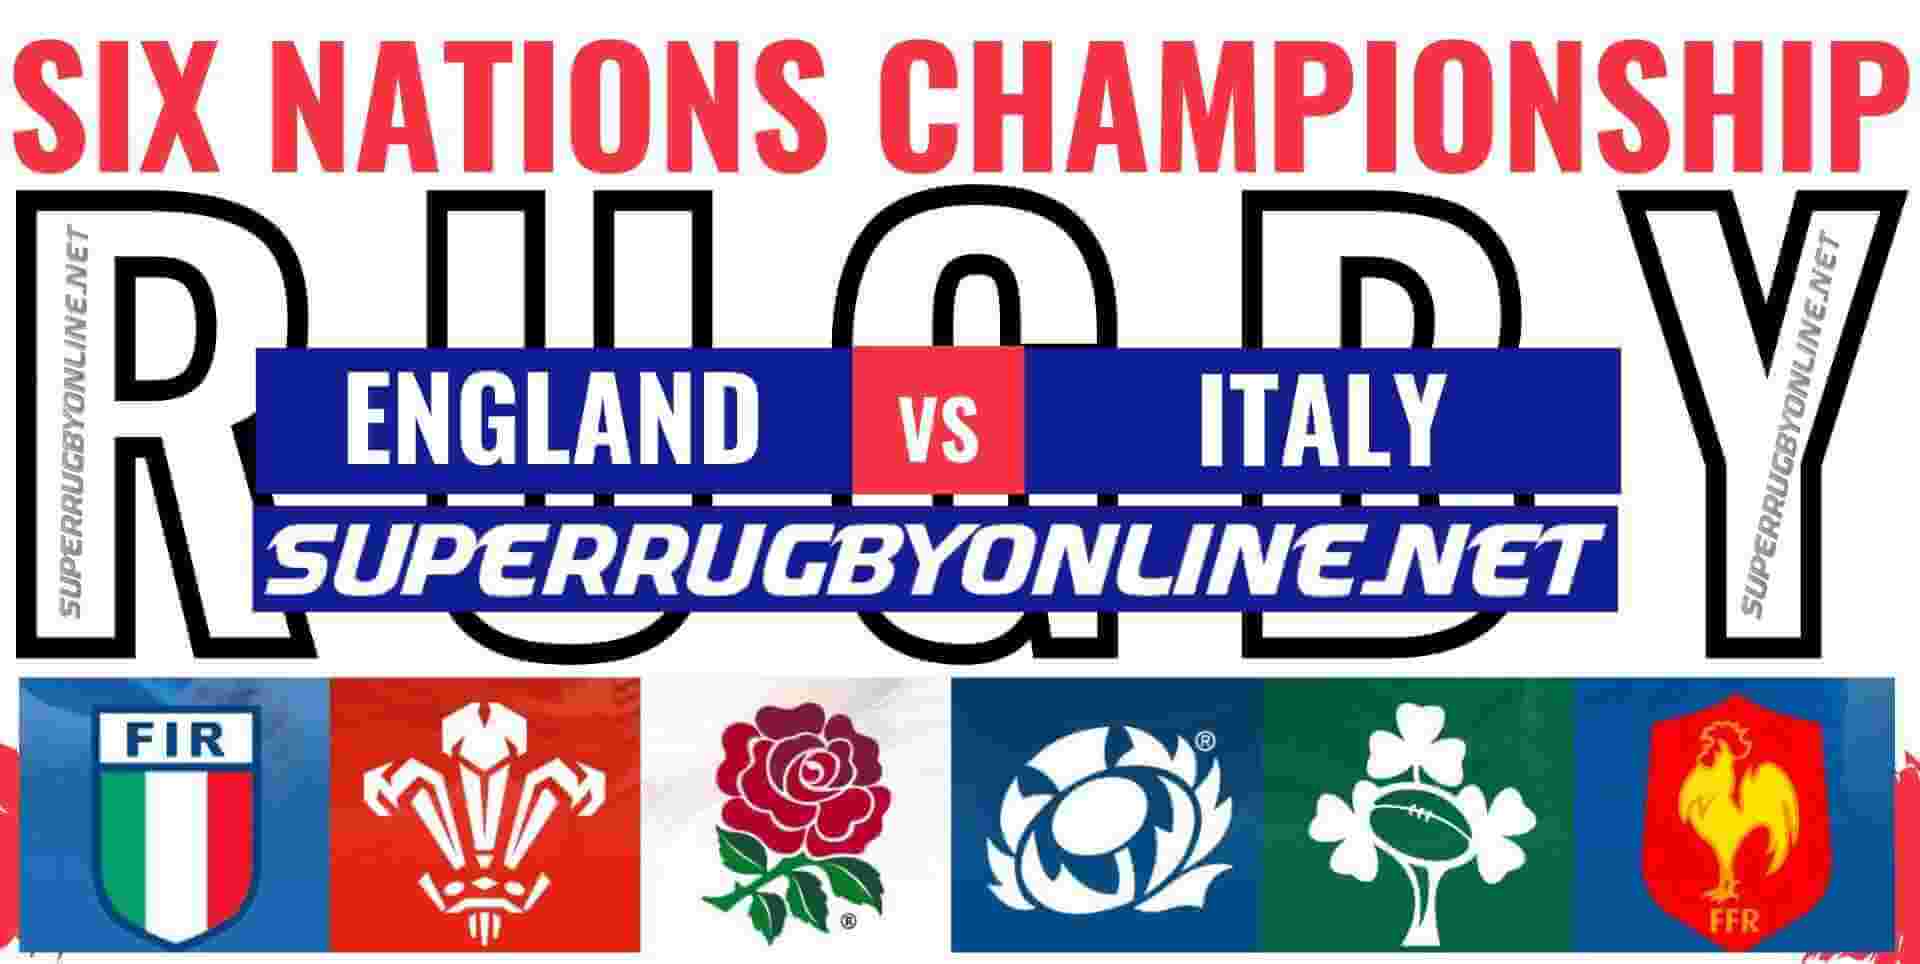 italy-vs-england-six-nations-rugby-live